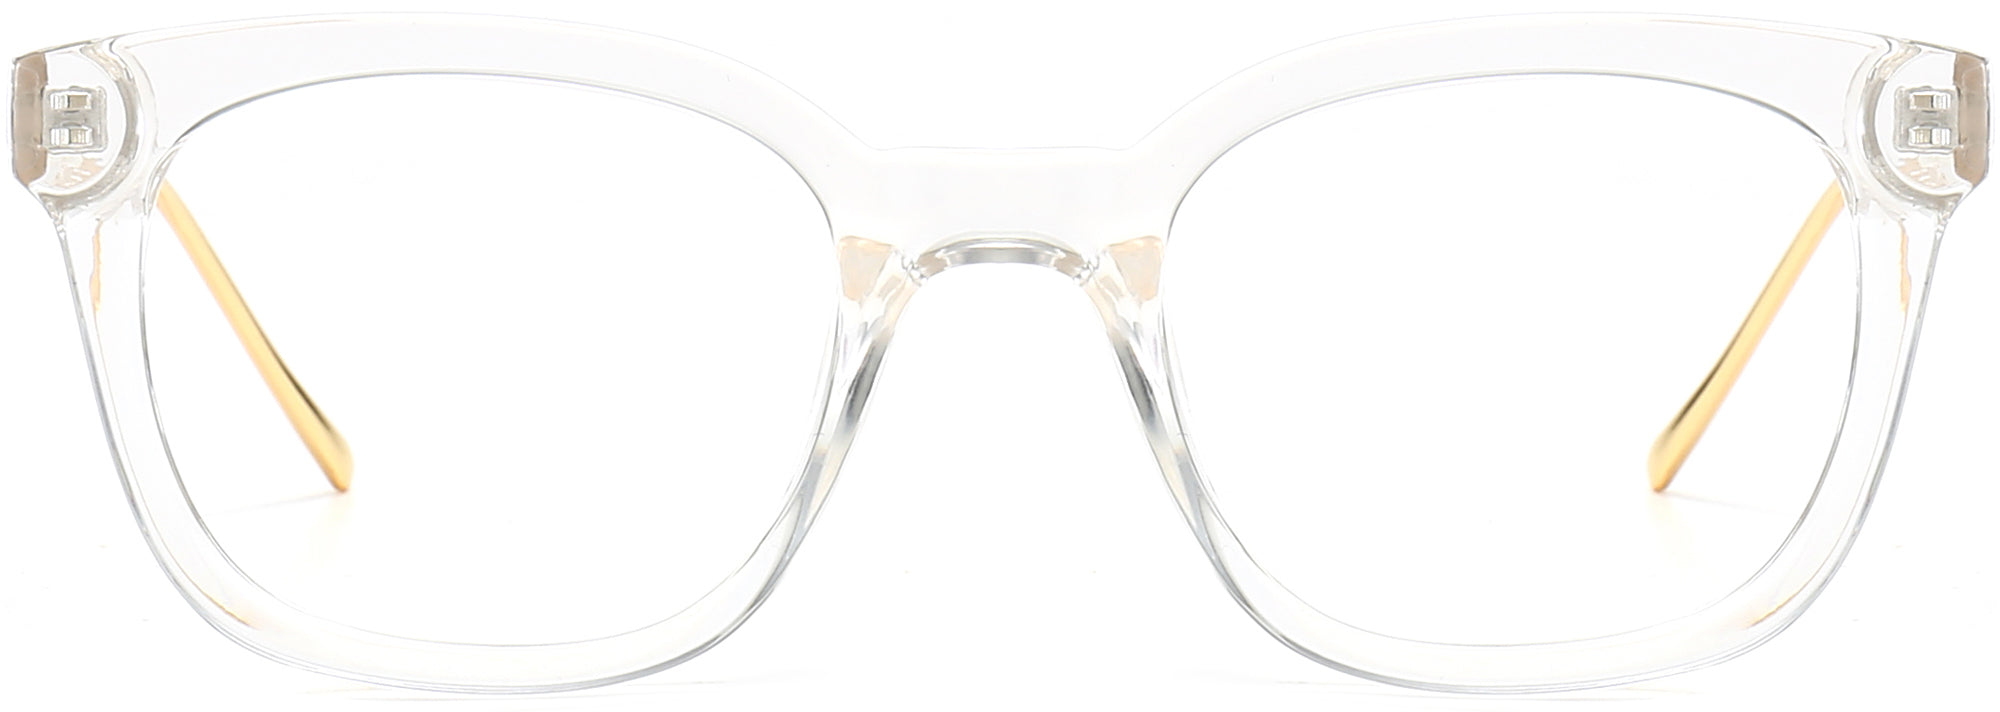 Ashlyn Square Clear Eyeglasses from ANRRI, front view